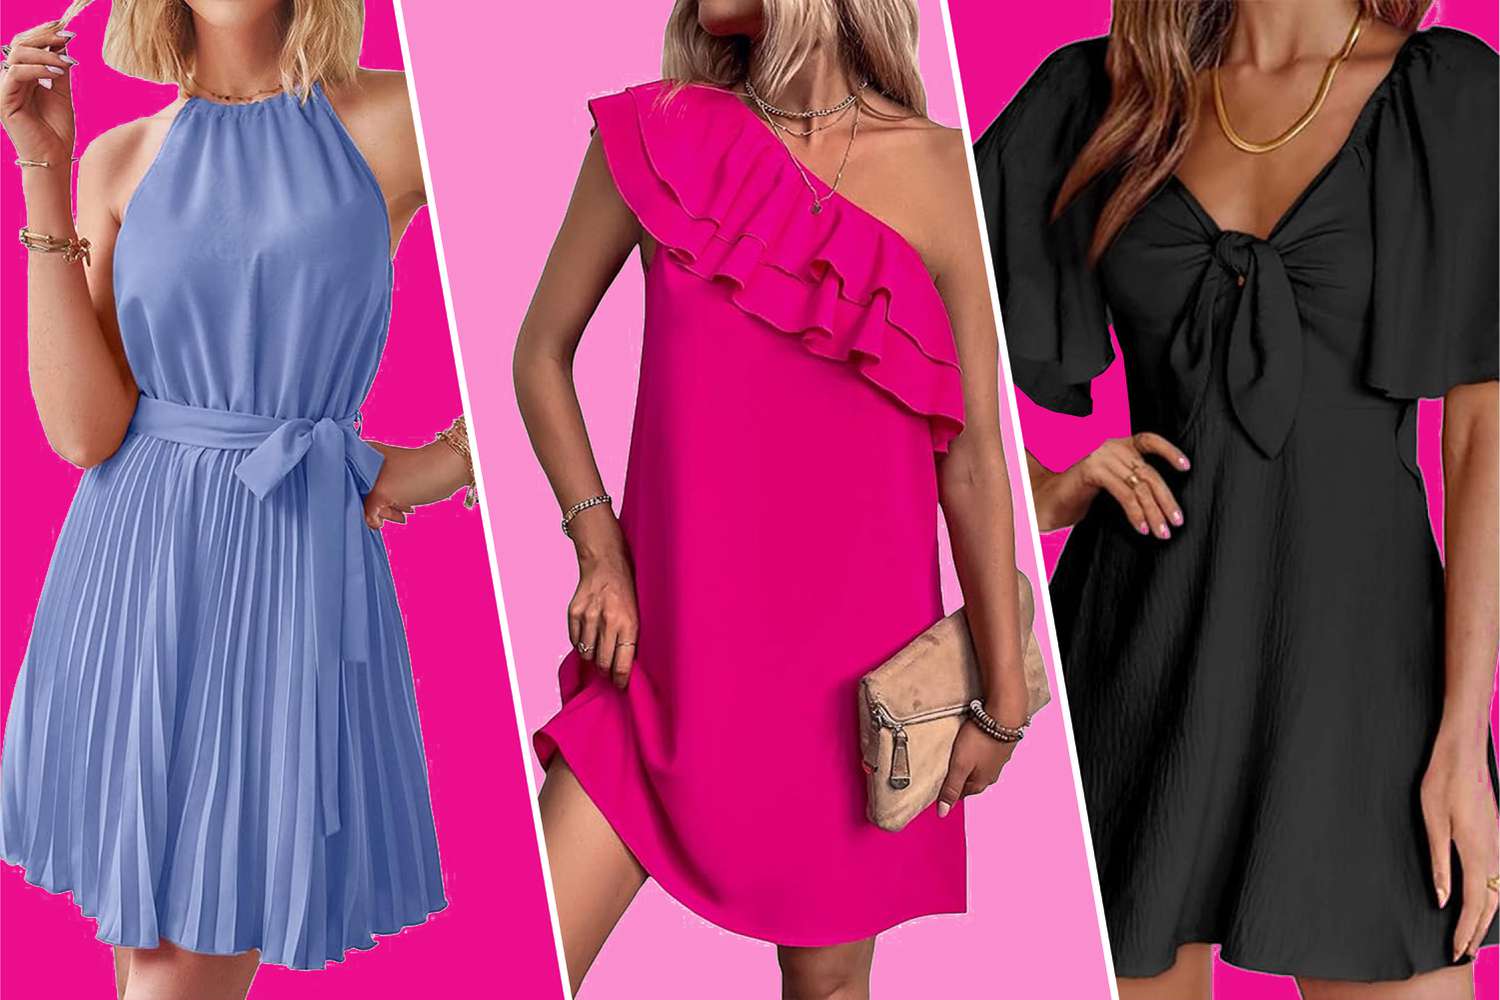 Amazon Is Overflowing With Stunning Summer Cocktail Dresses — All Under $50